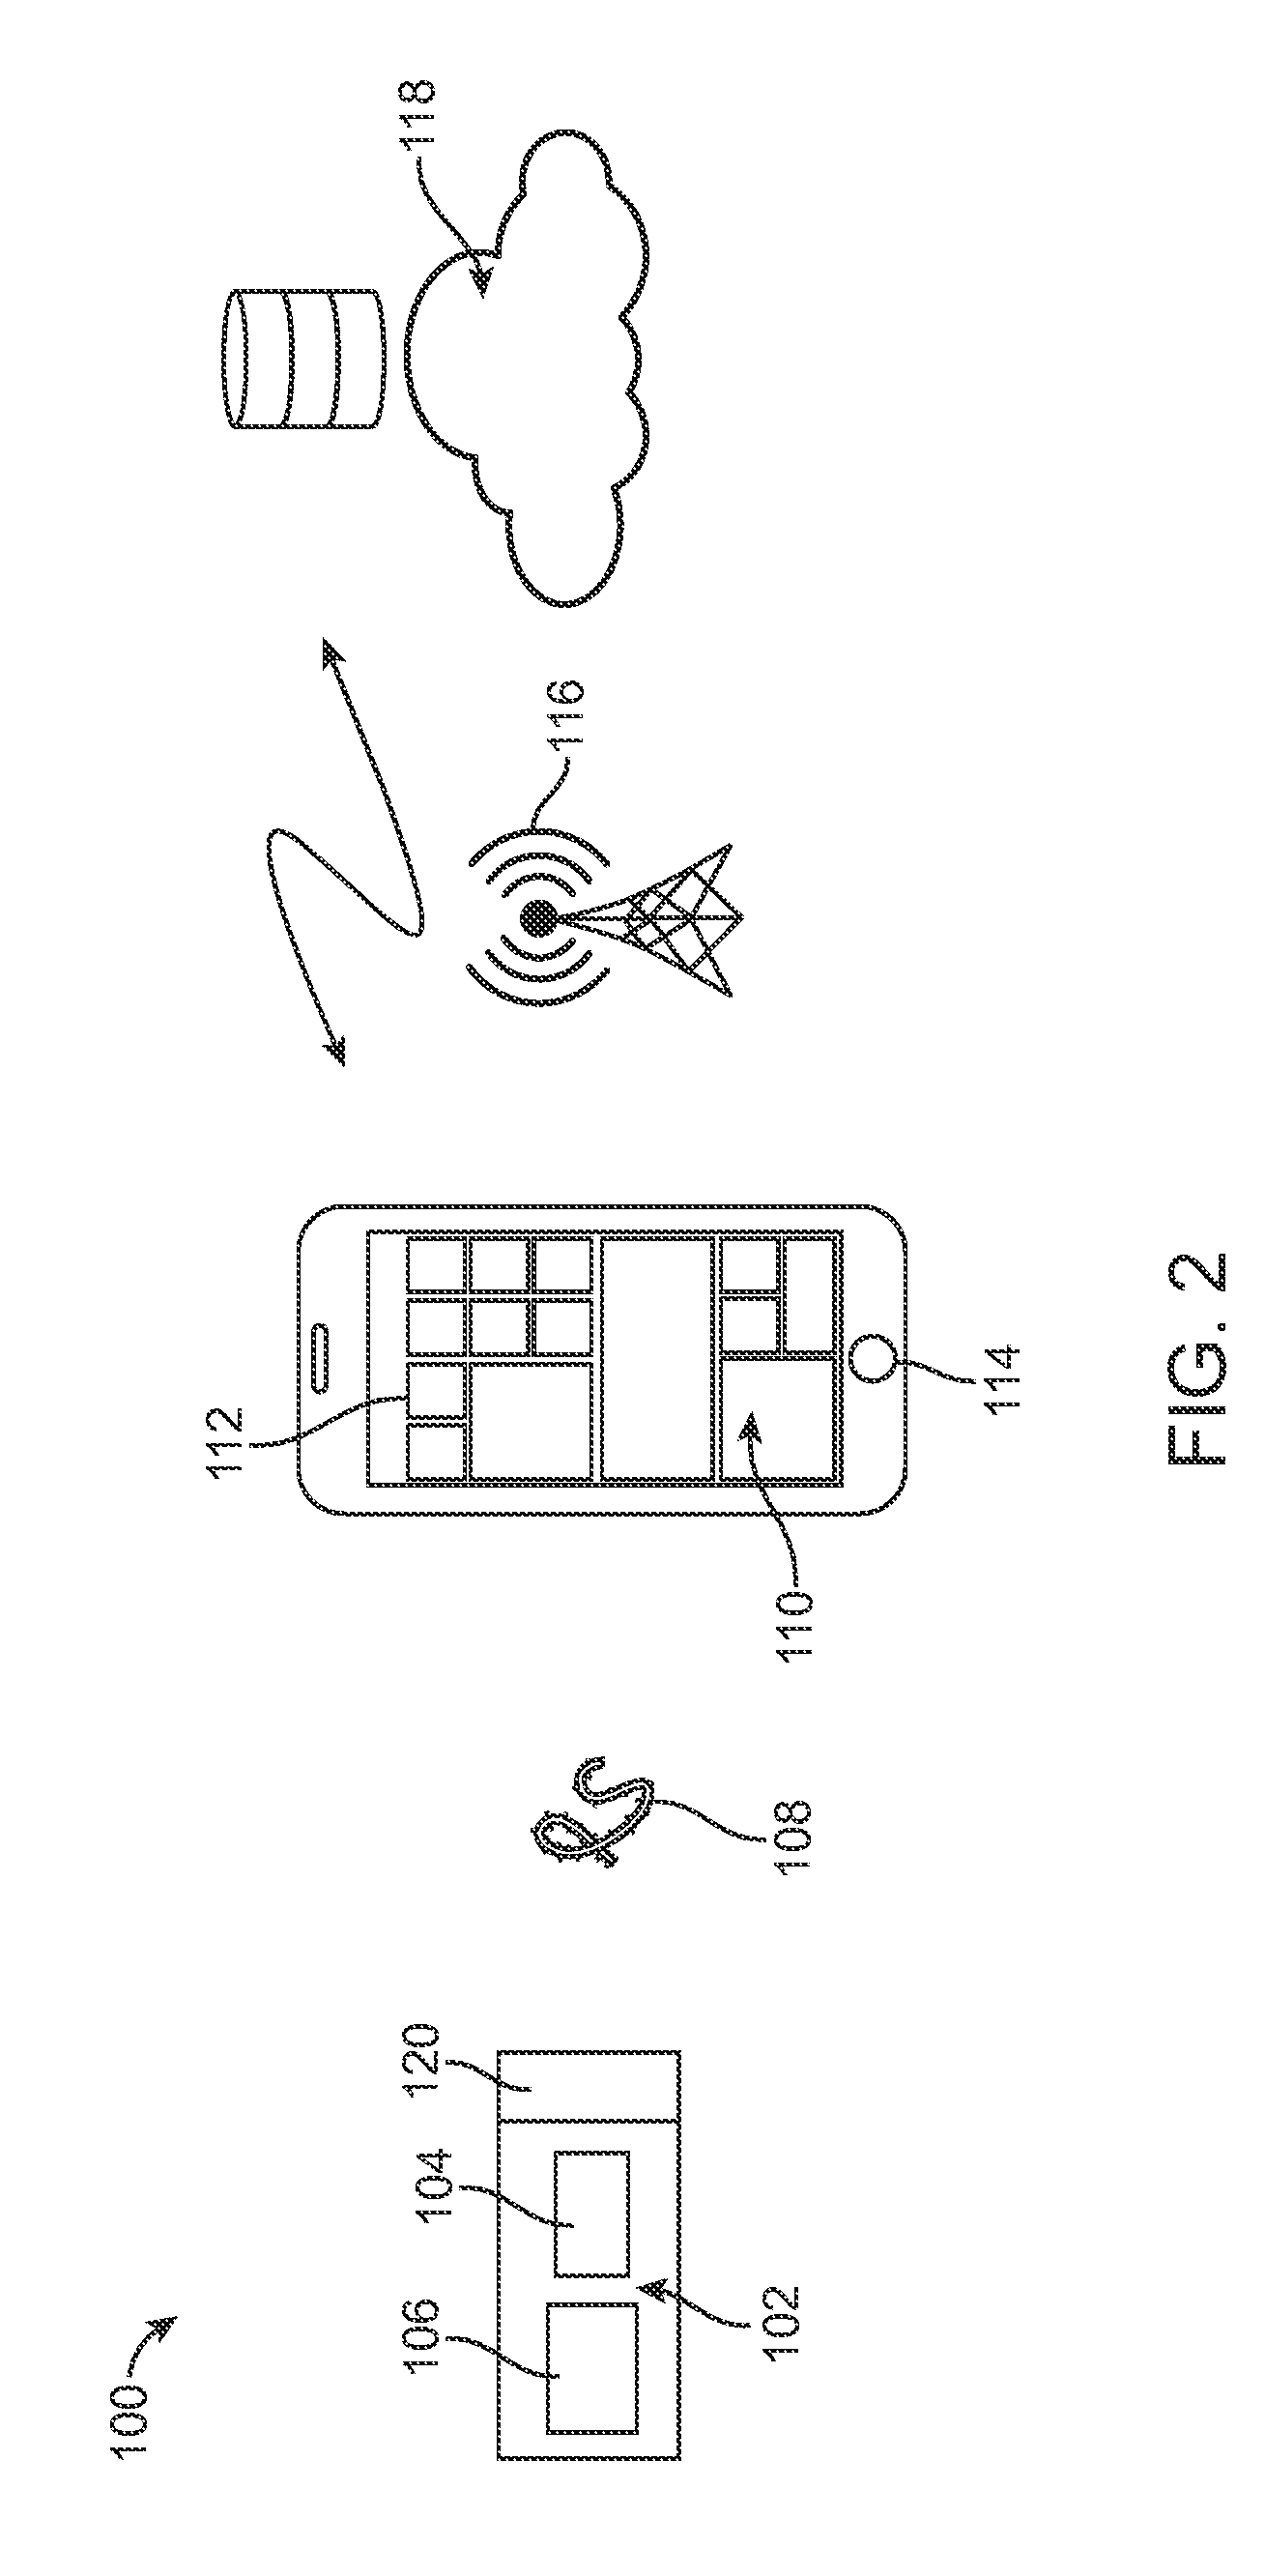 Spectrometry system with diffuser